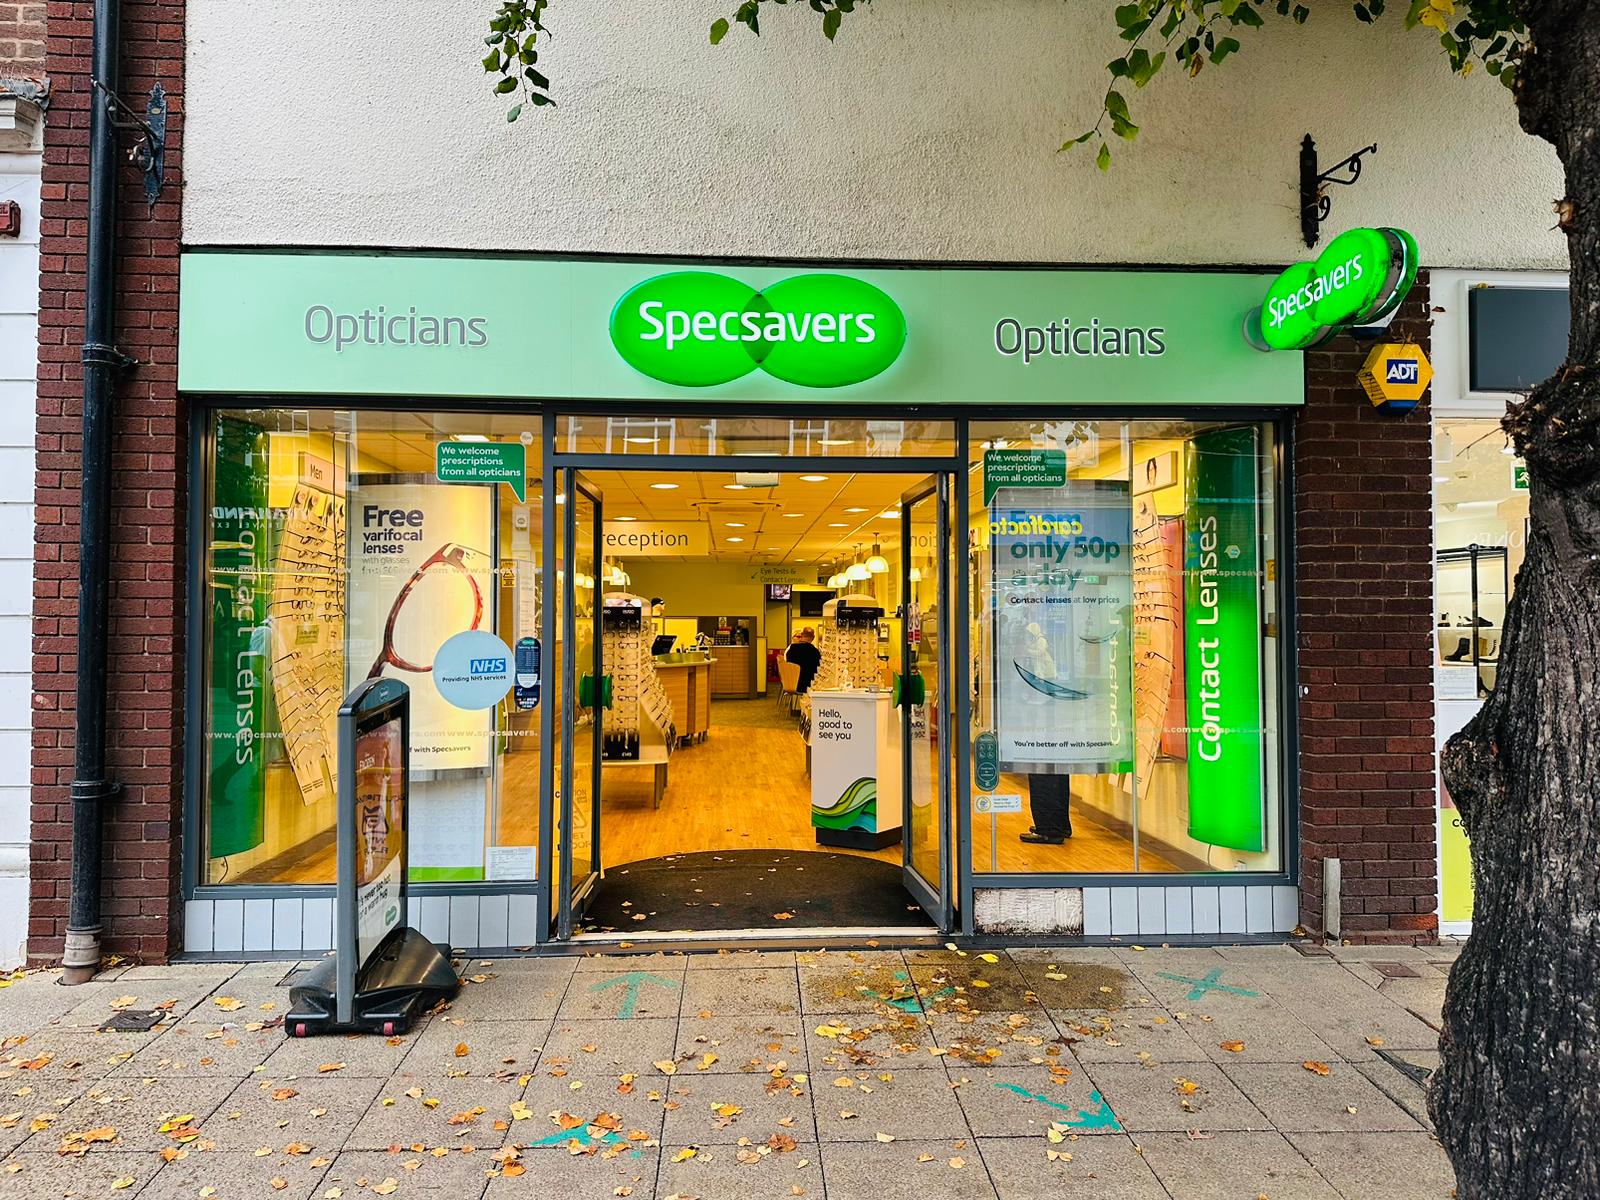 Specsavers Solihull Specsavers Opticians - Solihull Solihull 01217 113411